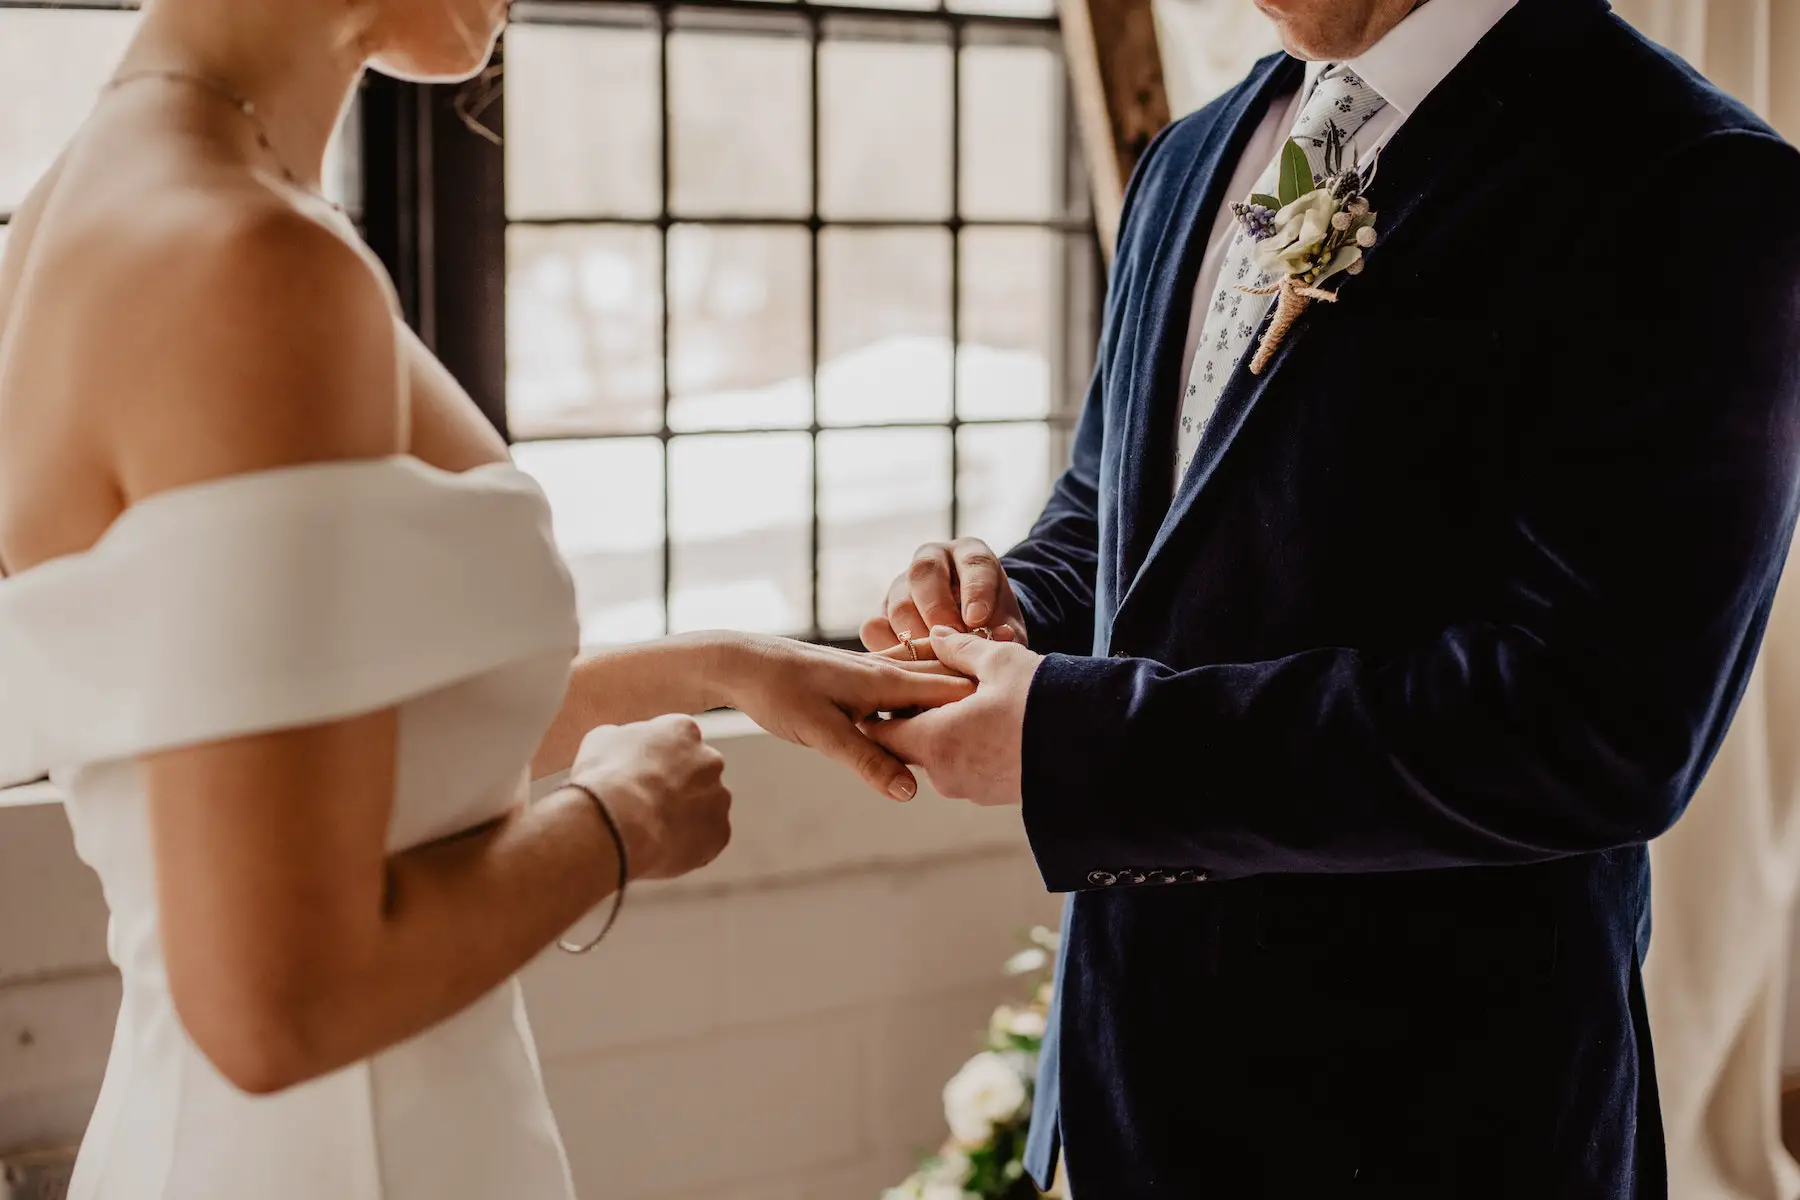 Groom places wedding ring on bride's finger during wedding ceremony